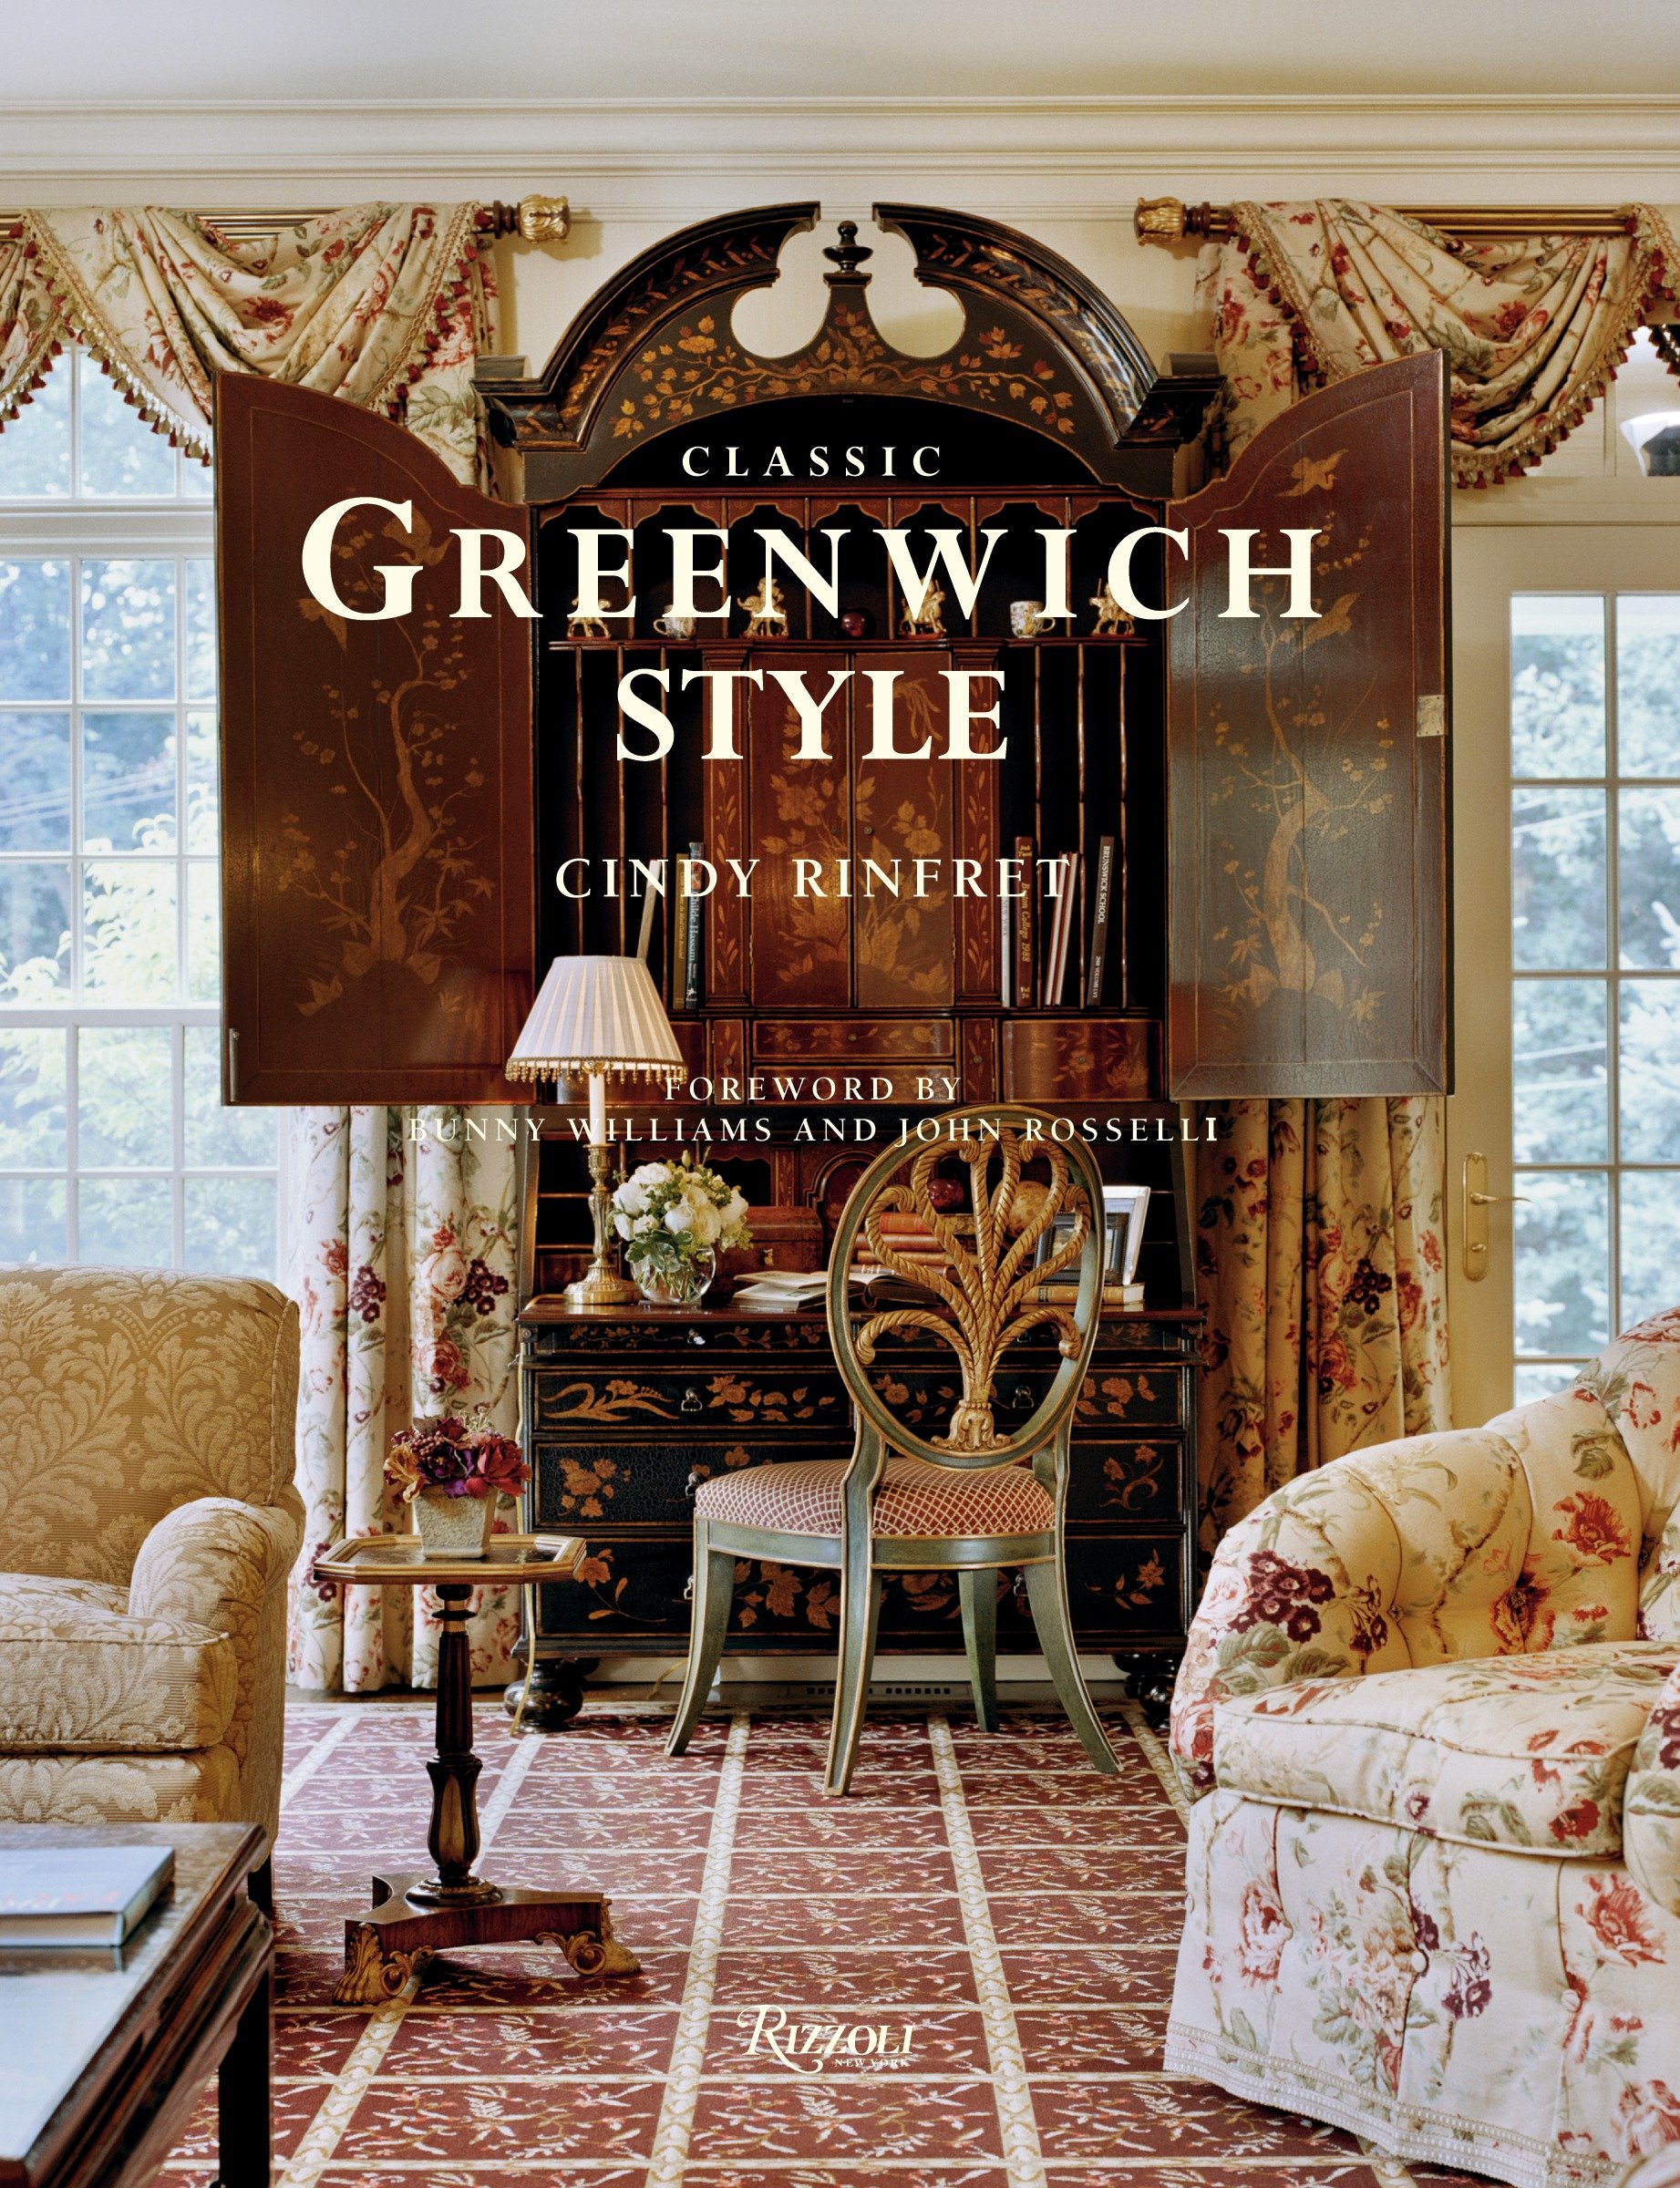 Classic Greenwich Style (Hardcover Book)